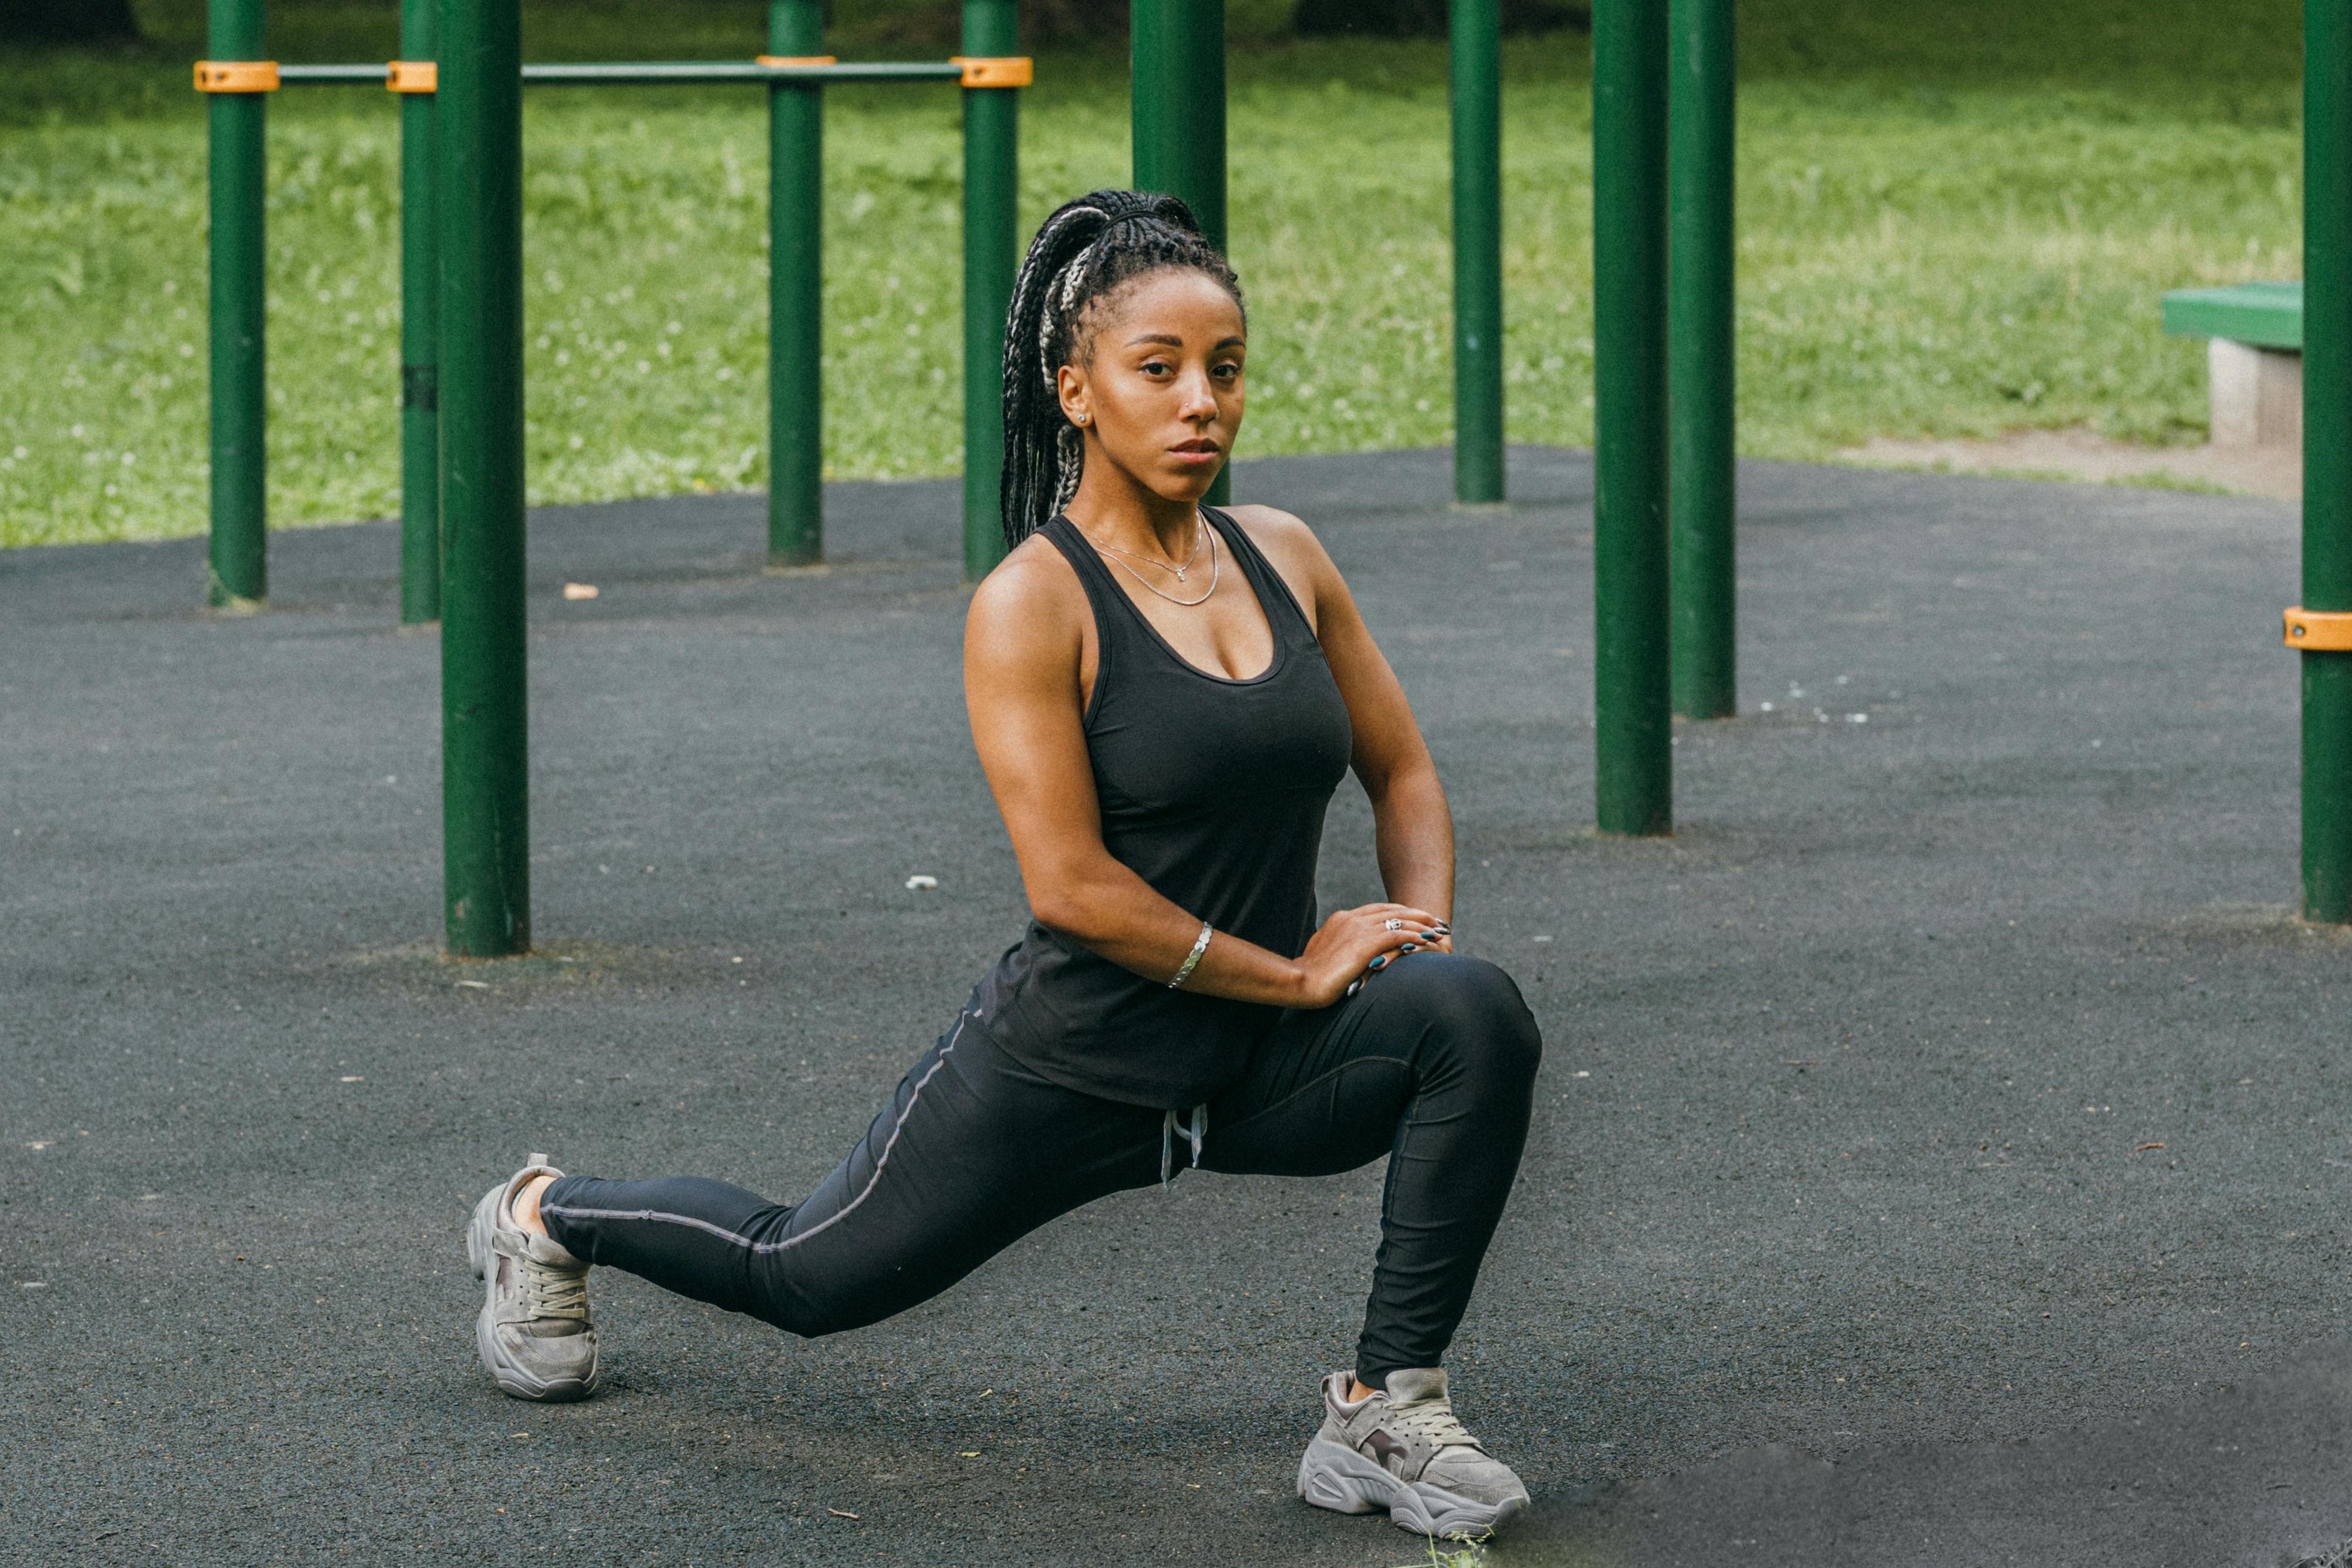 Person in Black Leggings Doing Leg Exercise with a Resistance Band